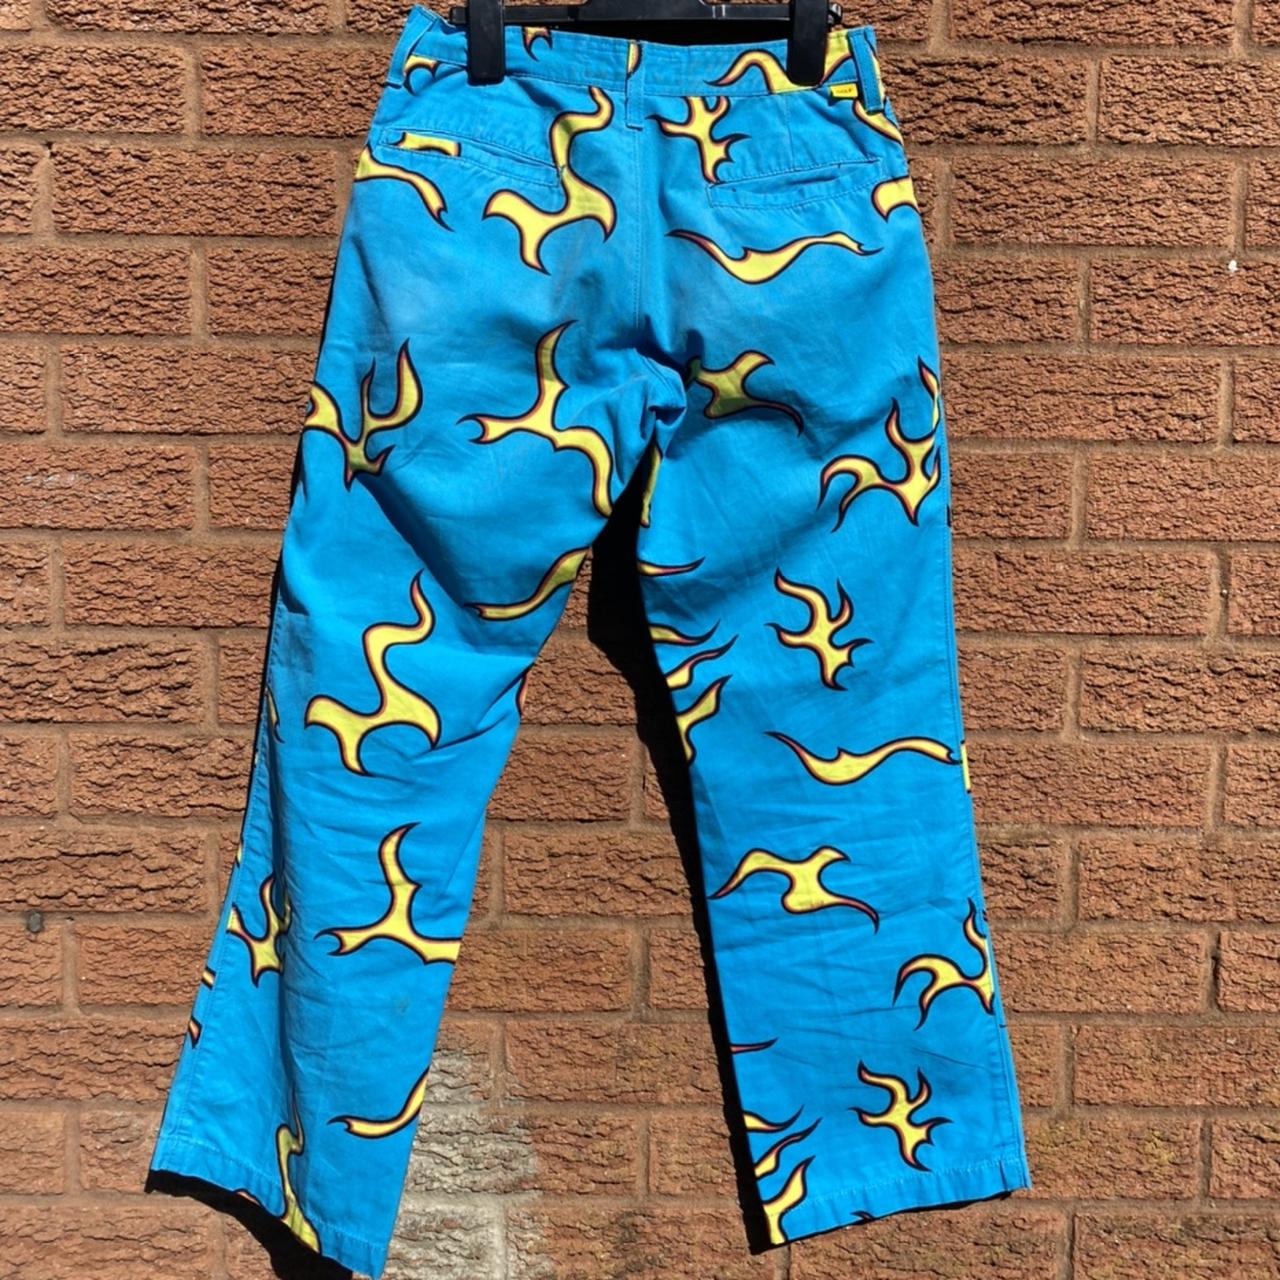 need gone, Golf Wang Flame Pants, size: 28, fit